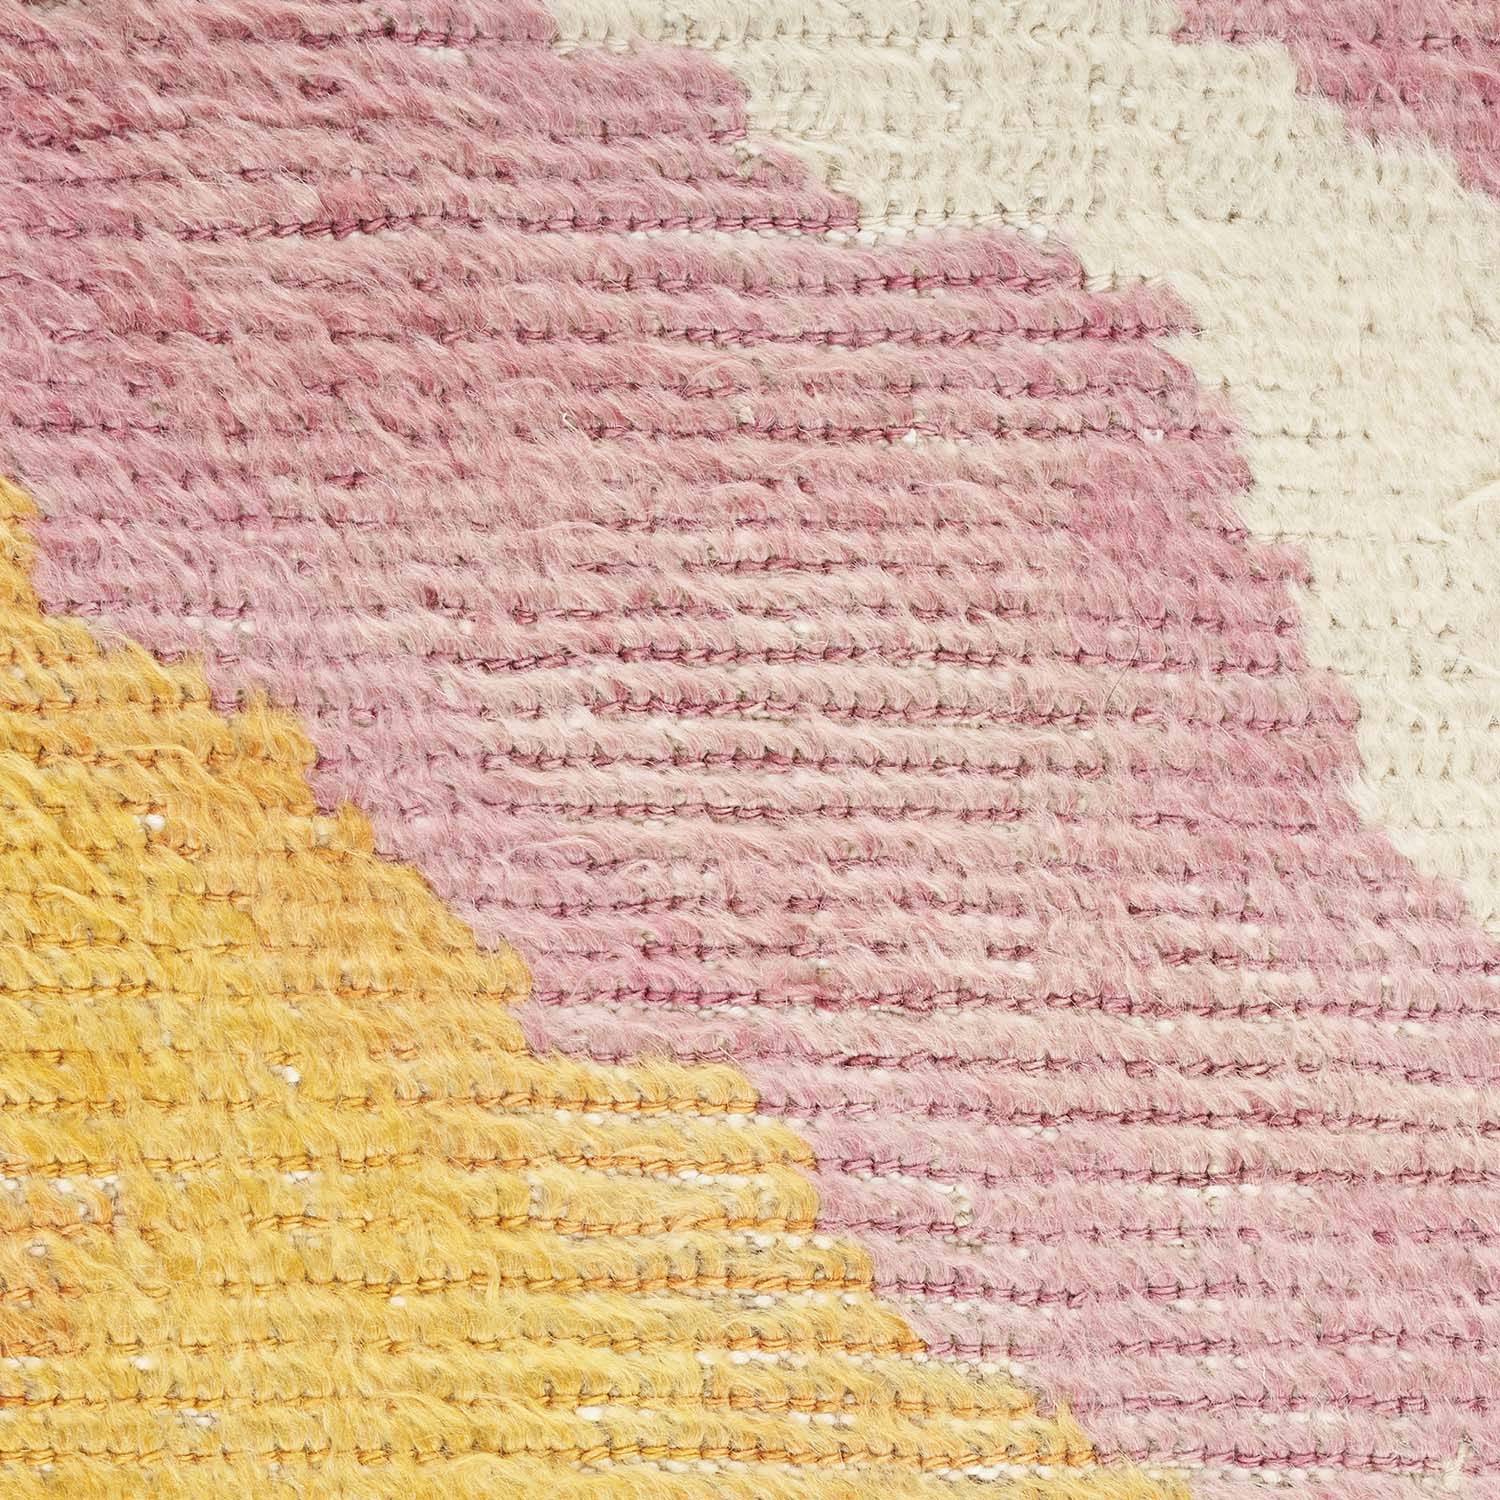 Close-up of a handmade textile with varying colors and textures.